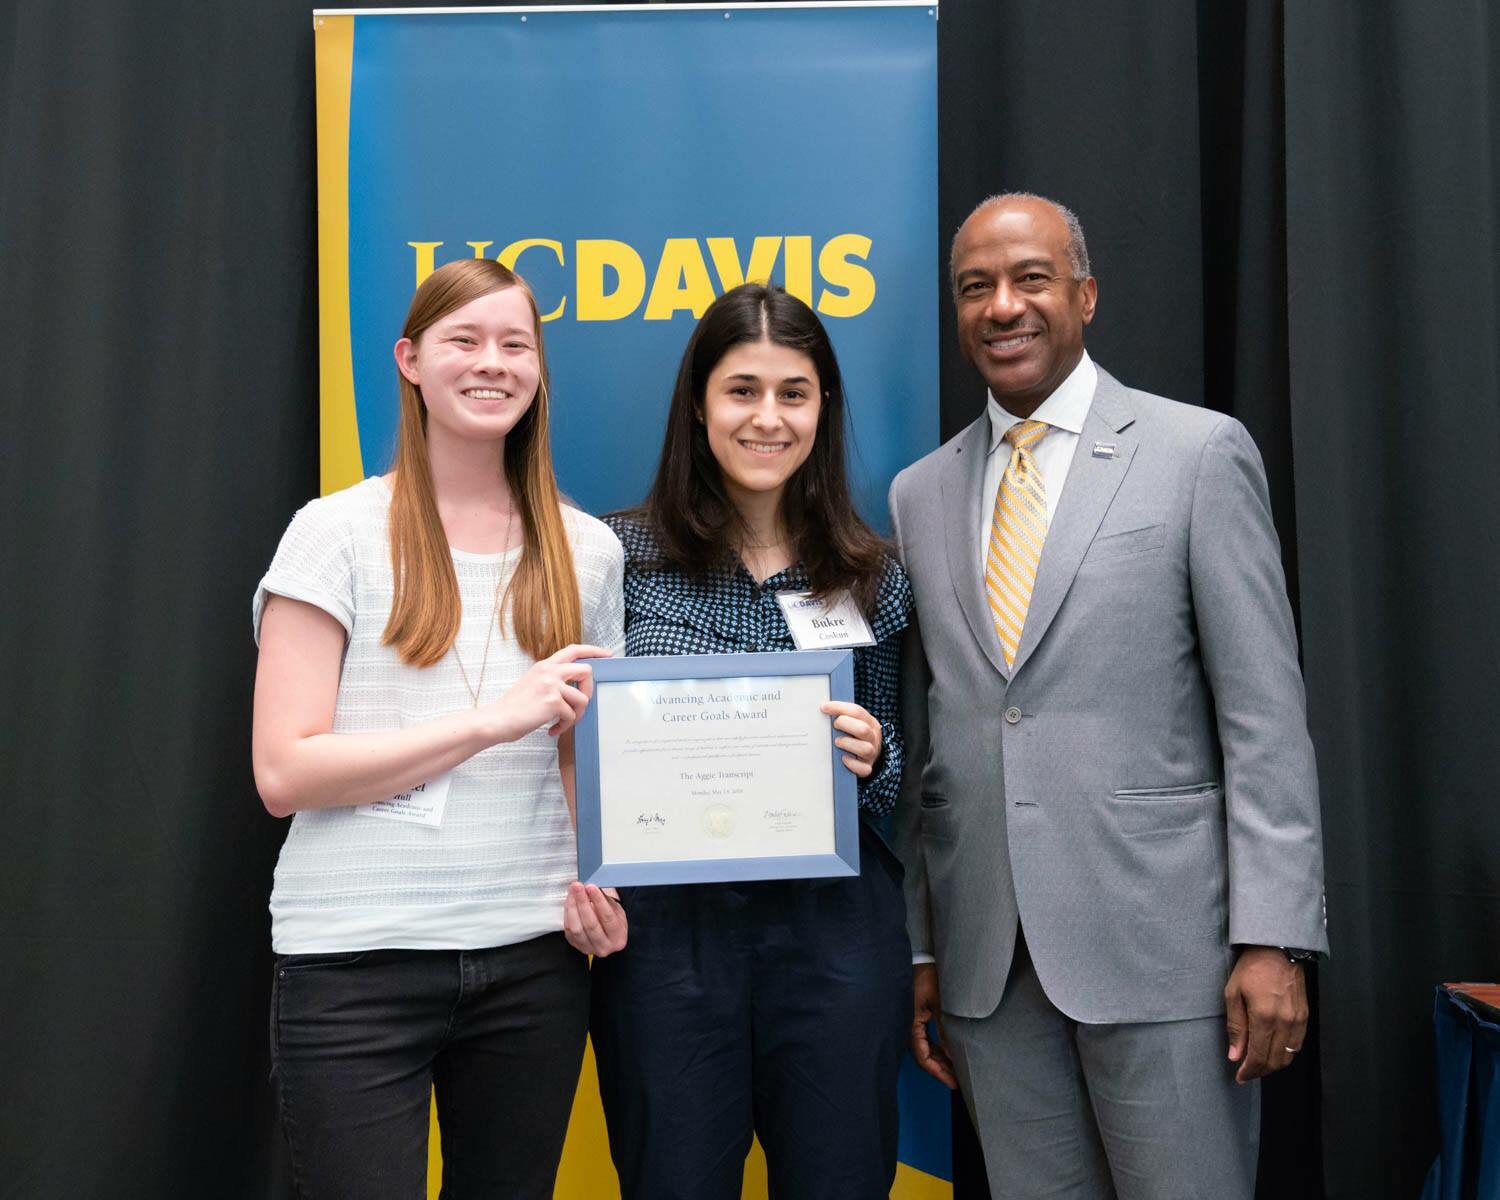 The Aggie Transcript editors Rachel Hull and Bukre Coskun stand with UC Davis Chancellor Gary May after receiving the UC Davis Advancing Academic and Career Goals Award. Courtesy photo. 